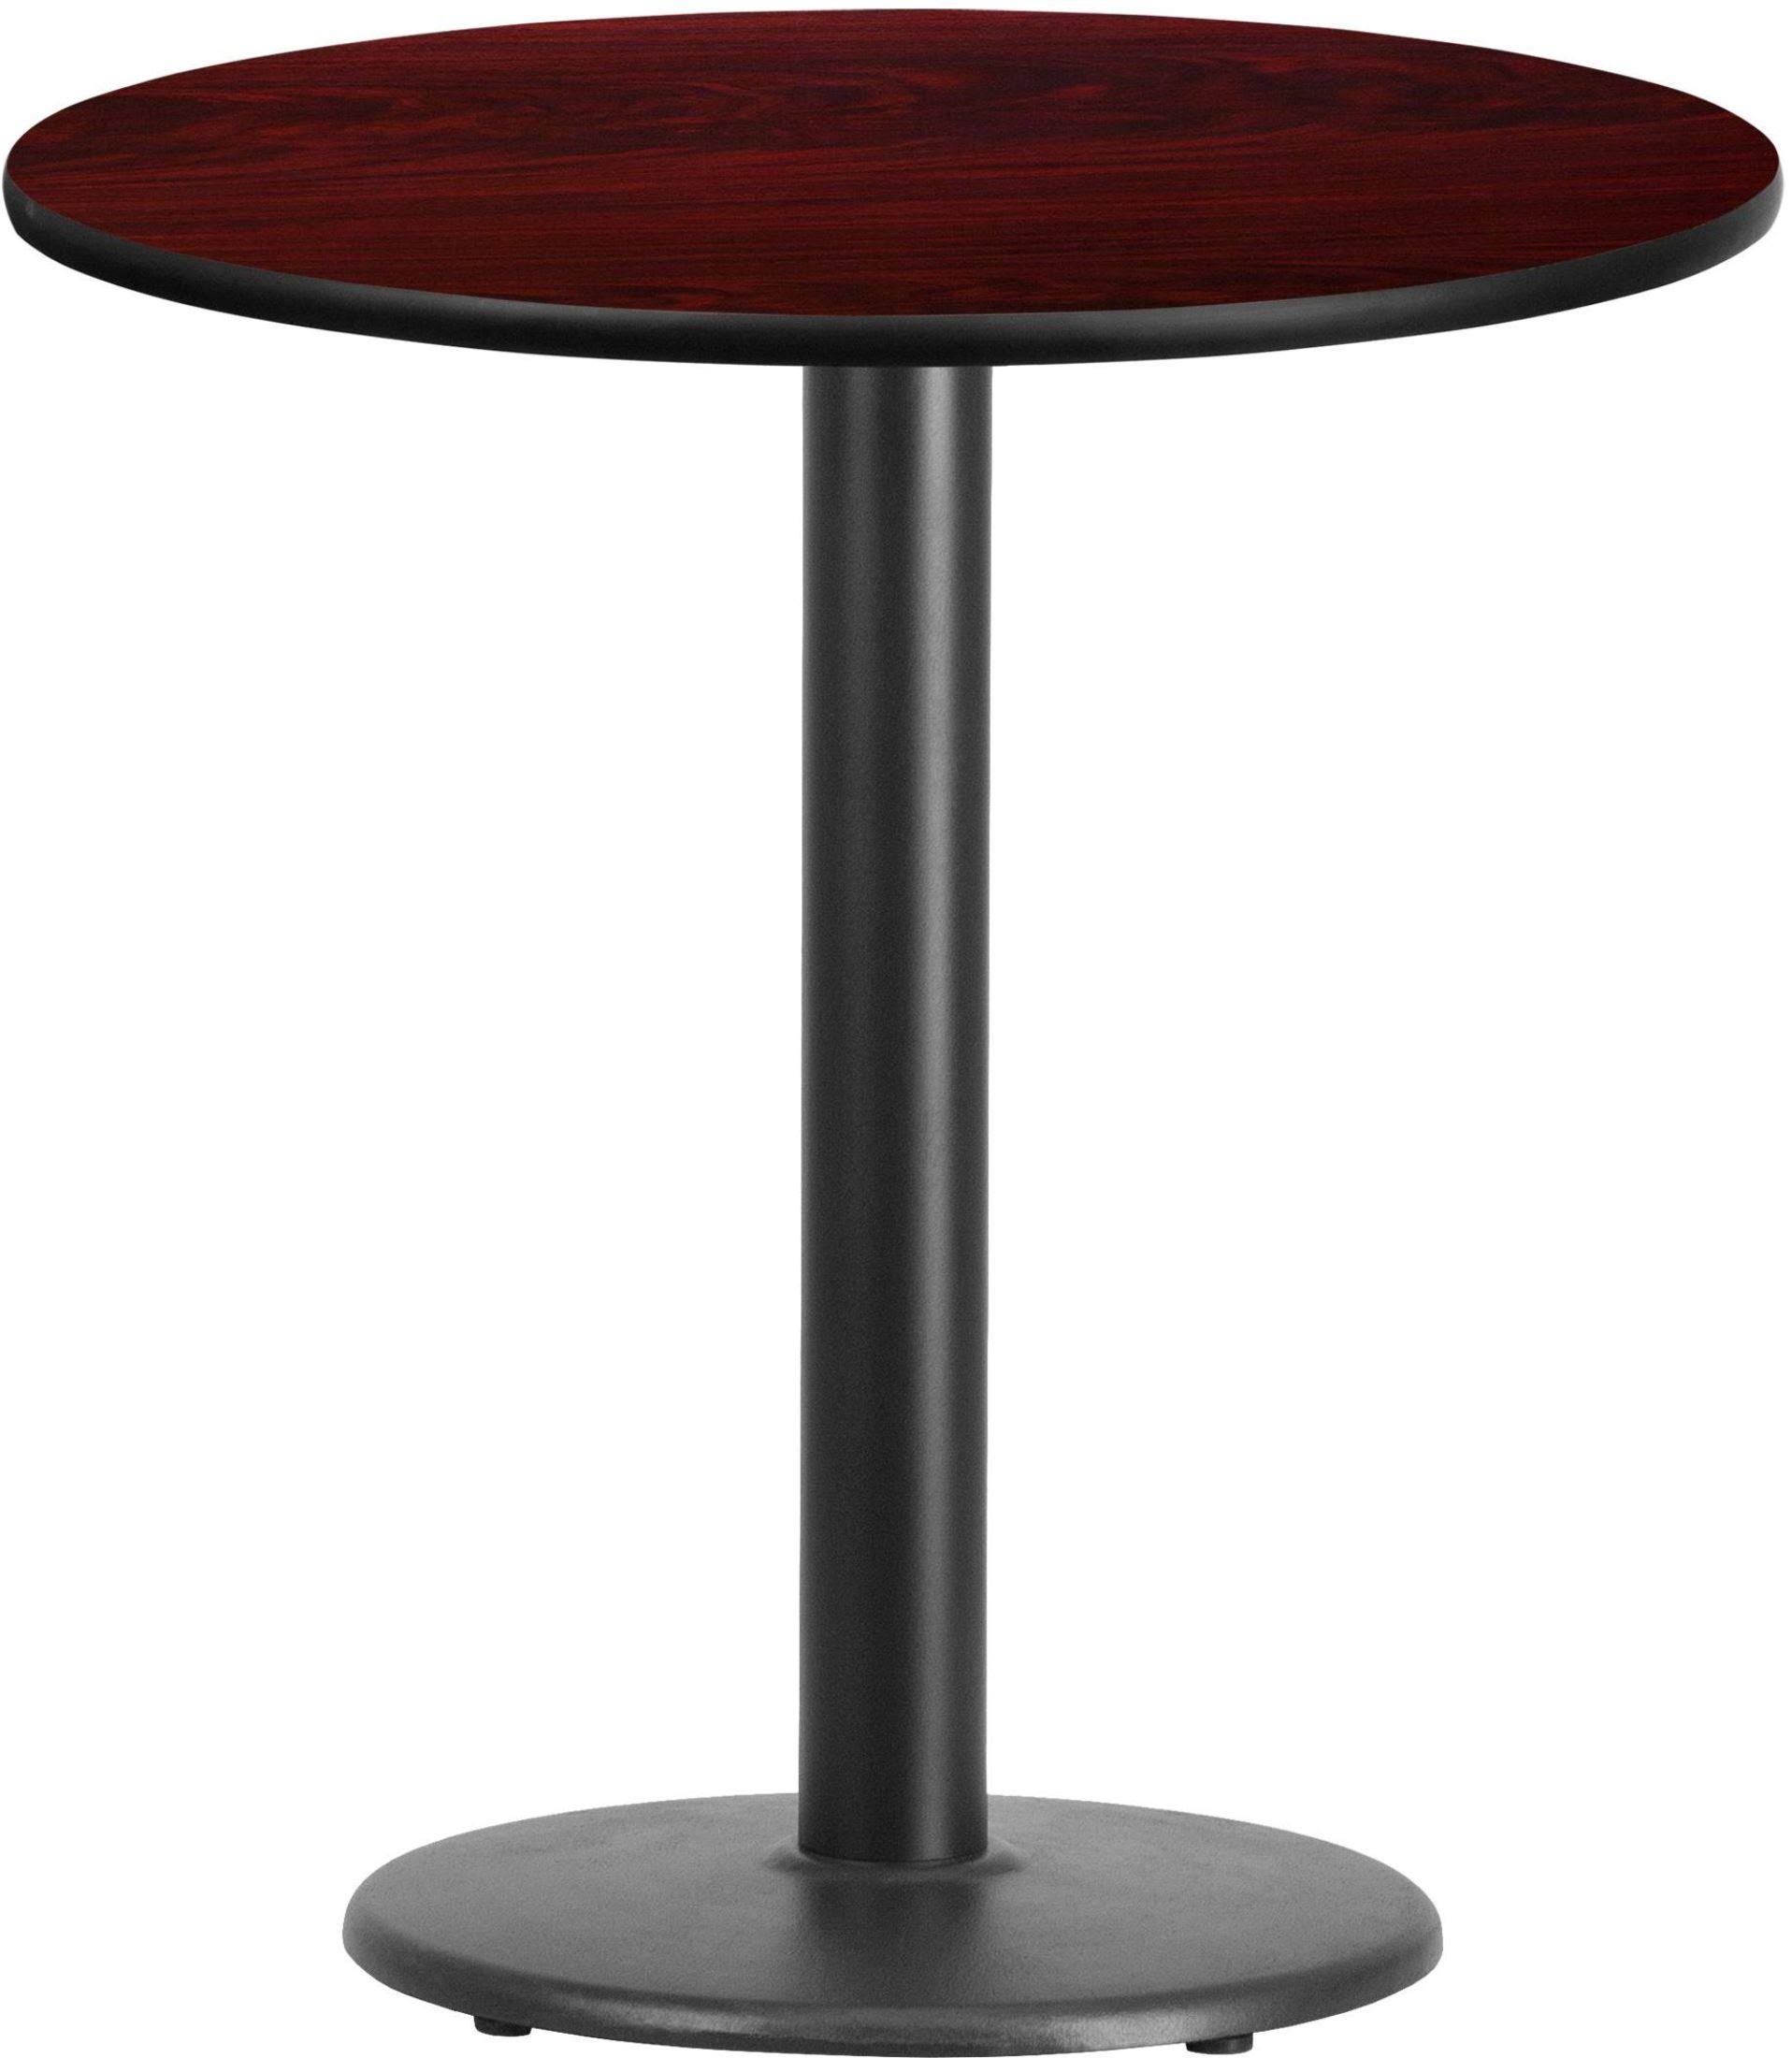 24'' ROUND MAHOGANY LAMINATE TABLE TOP WITH 18'' ROUND BAR HEIGHT BASE 